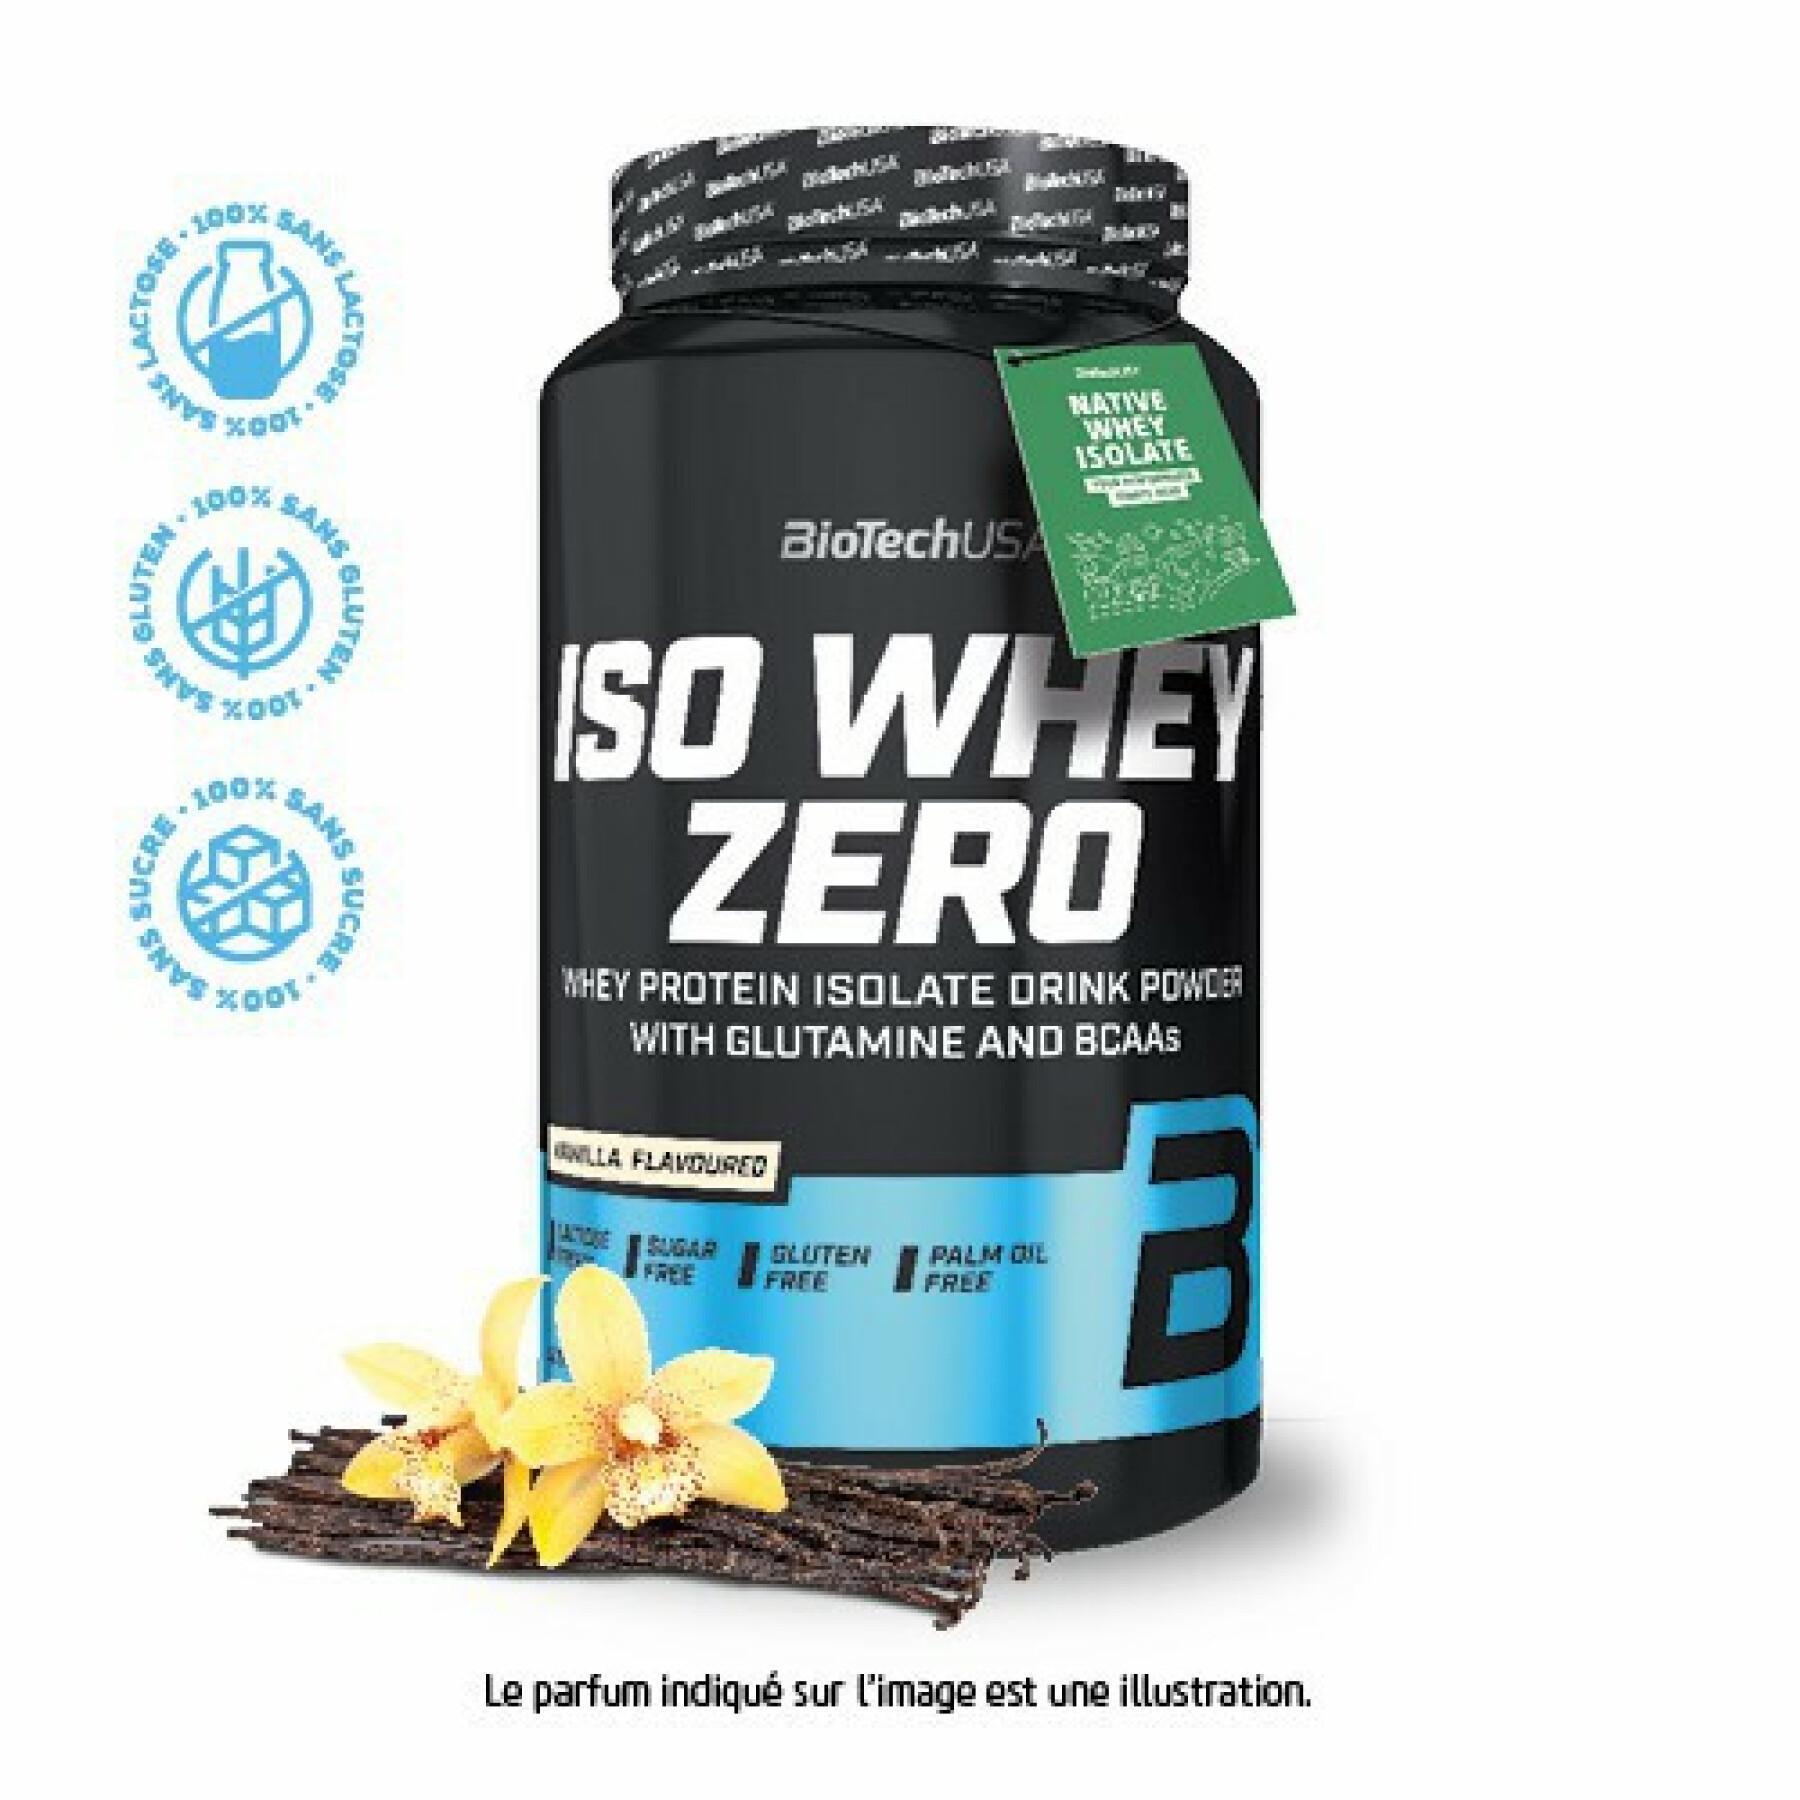 Pack of 6 jars of protein Biotech USA iso whey zero lactose free - Vanille 908g